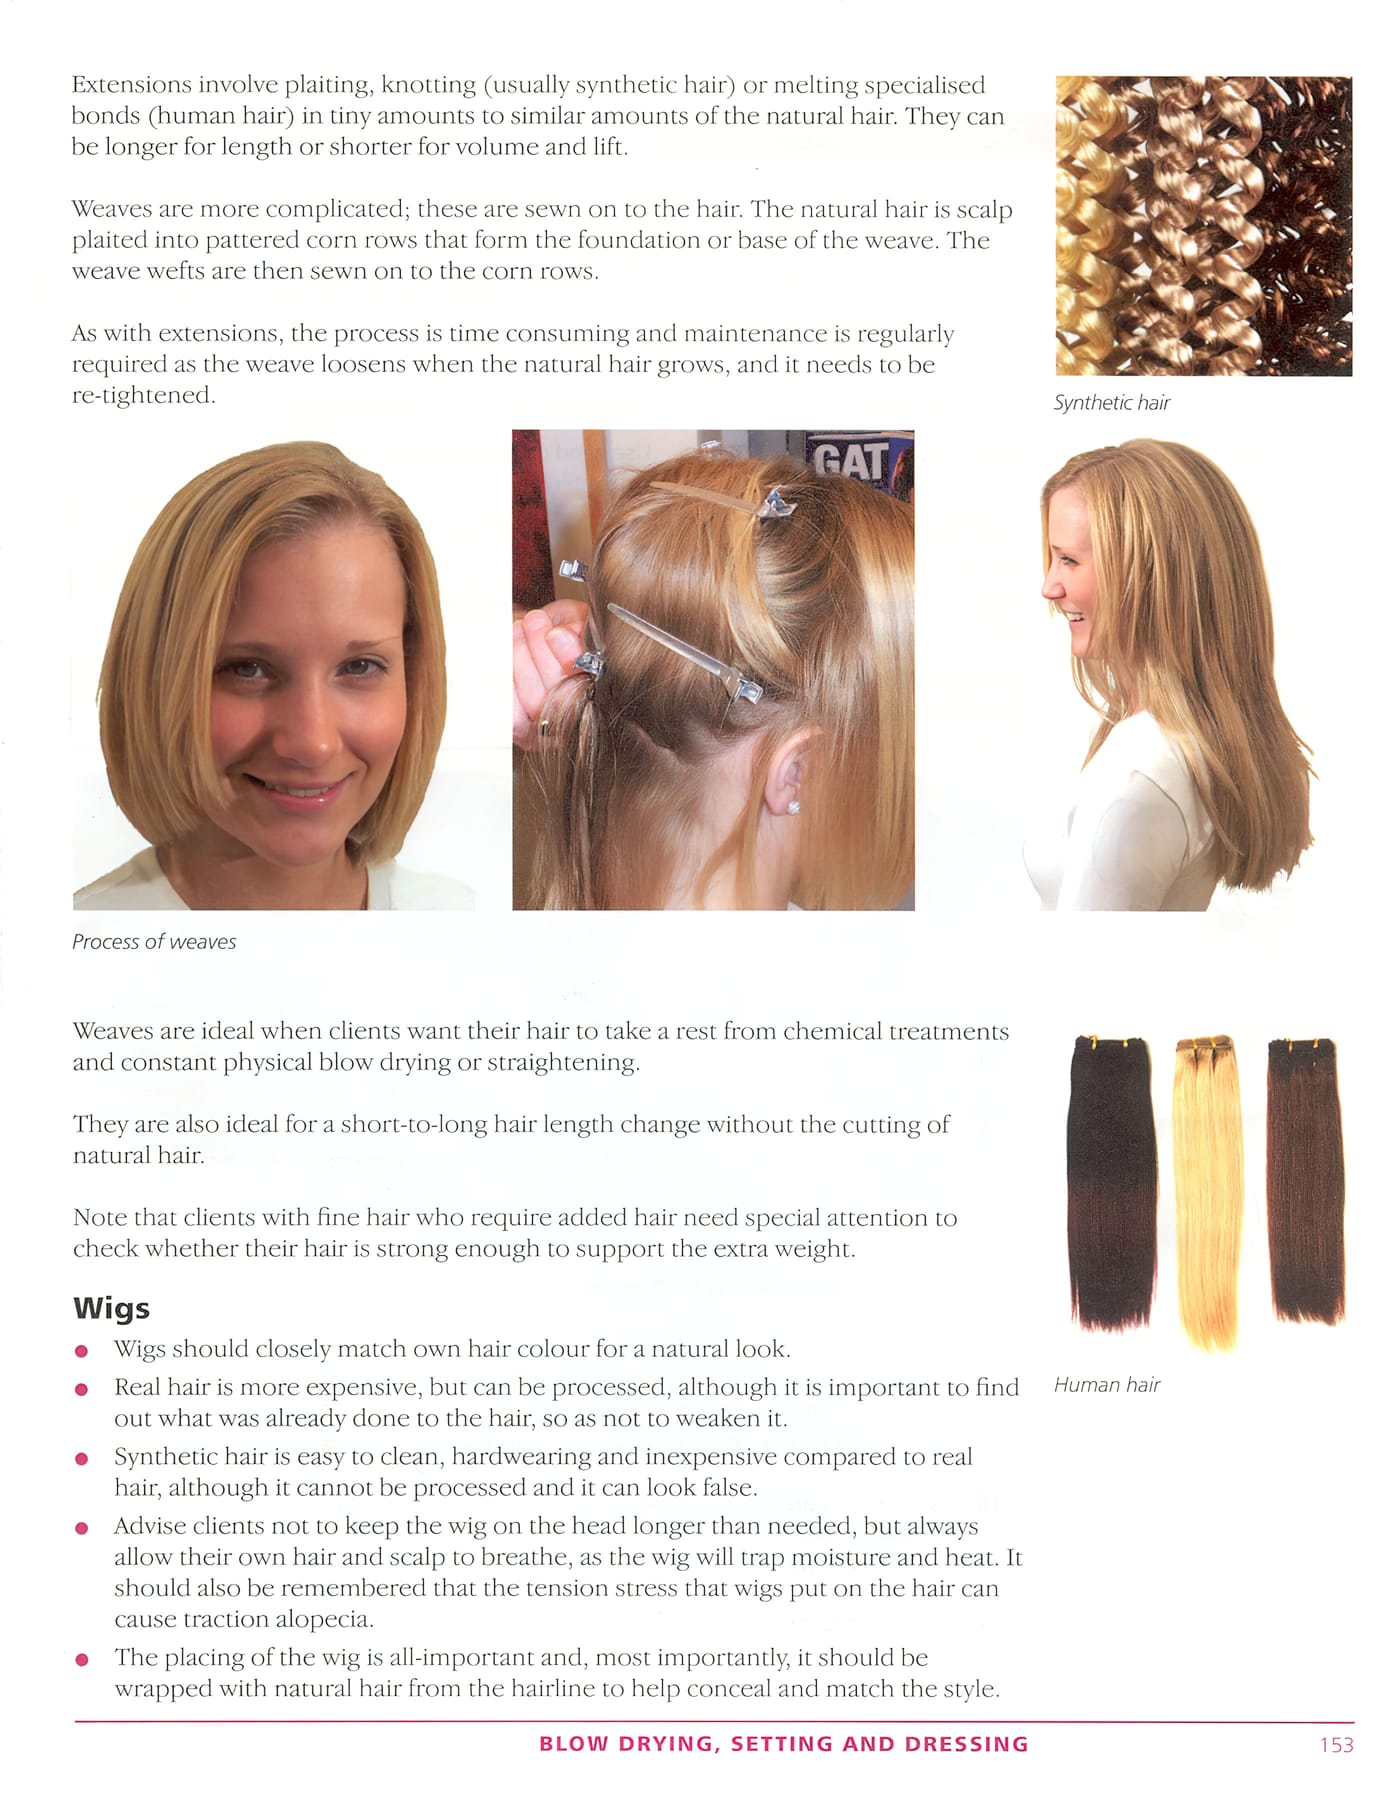 MG extensions featured in top hairdressing textbook